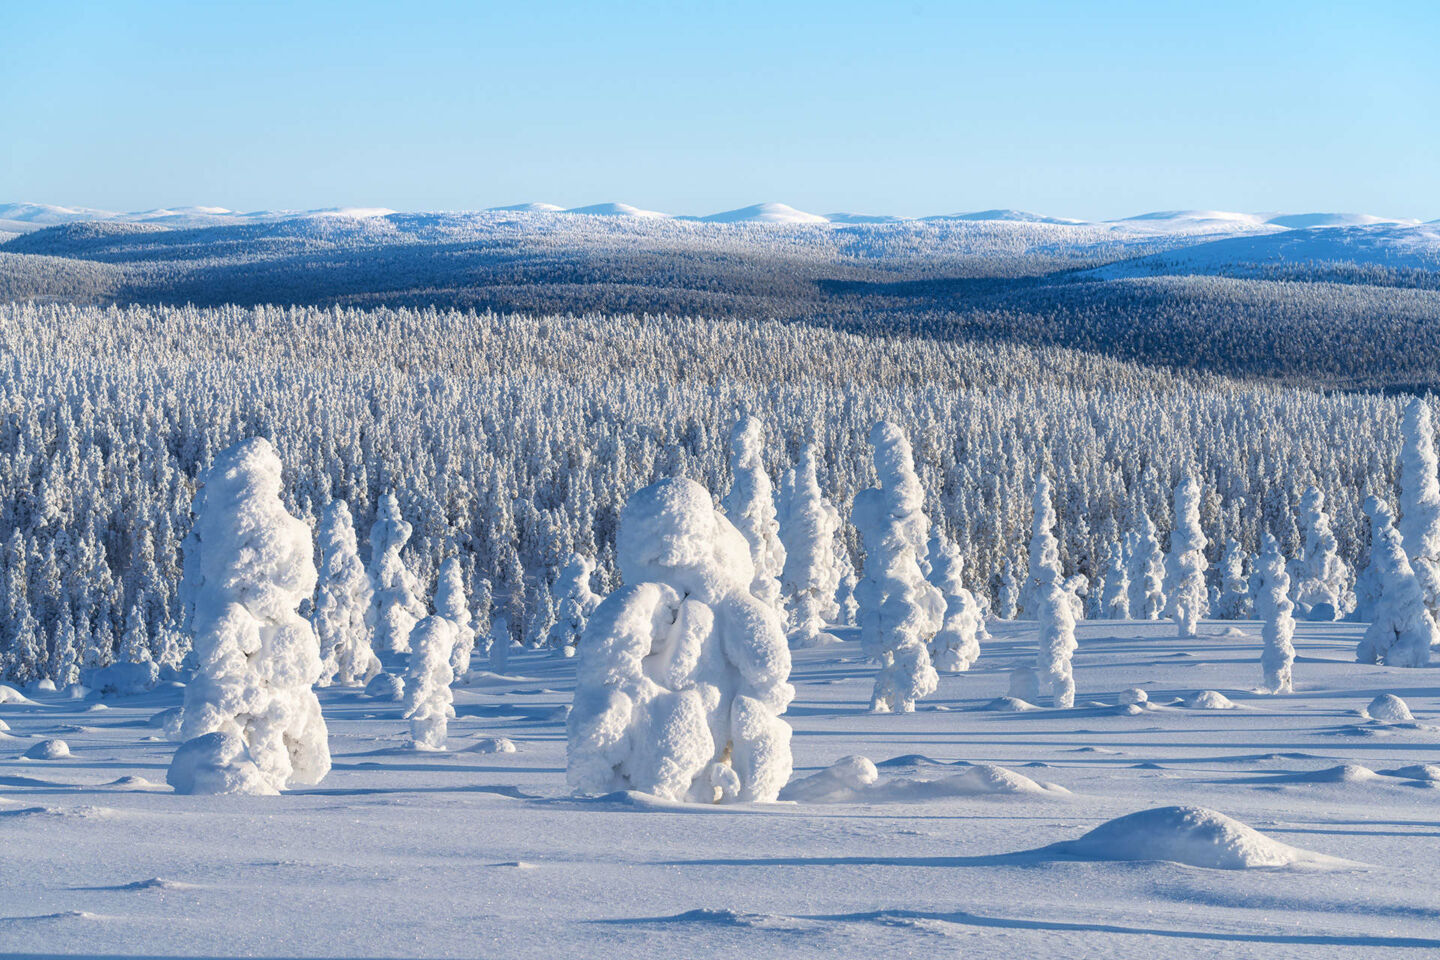 Snow-crowned trees in winter in Inari, a Finnish Lapland filming location